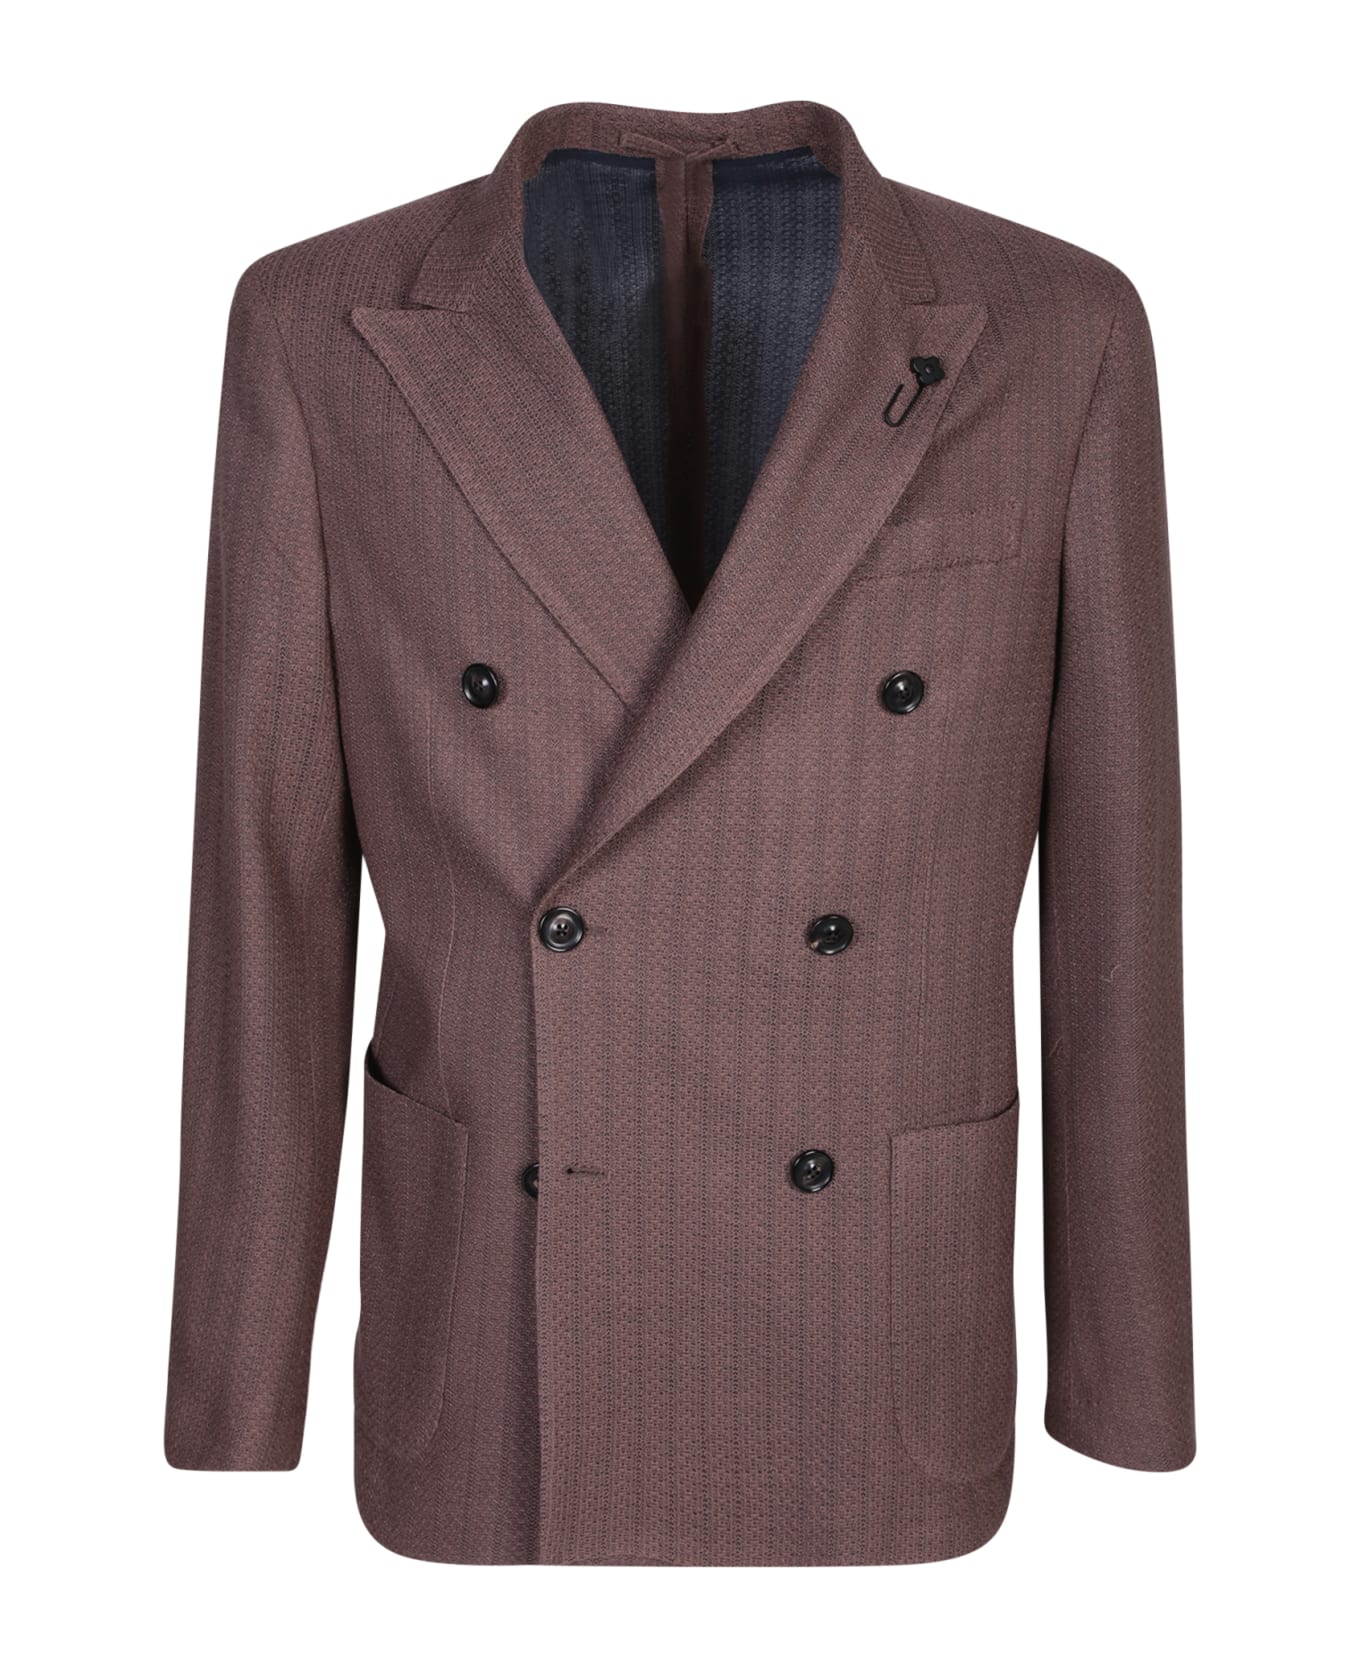 Lardini Jersey Double-breasted Brown Jacket - Brown